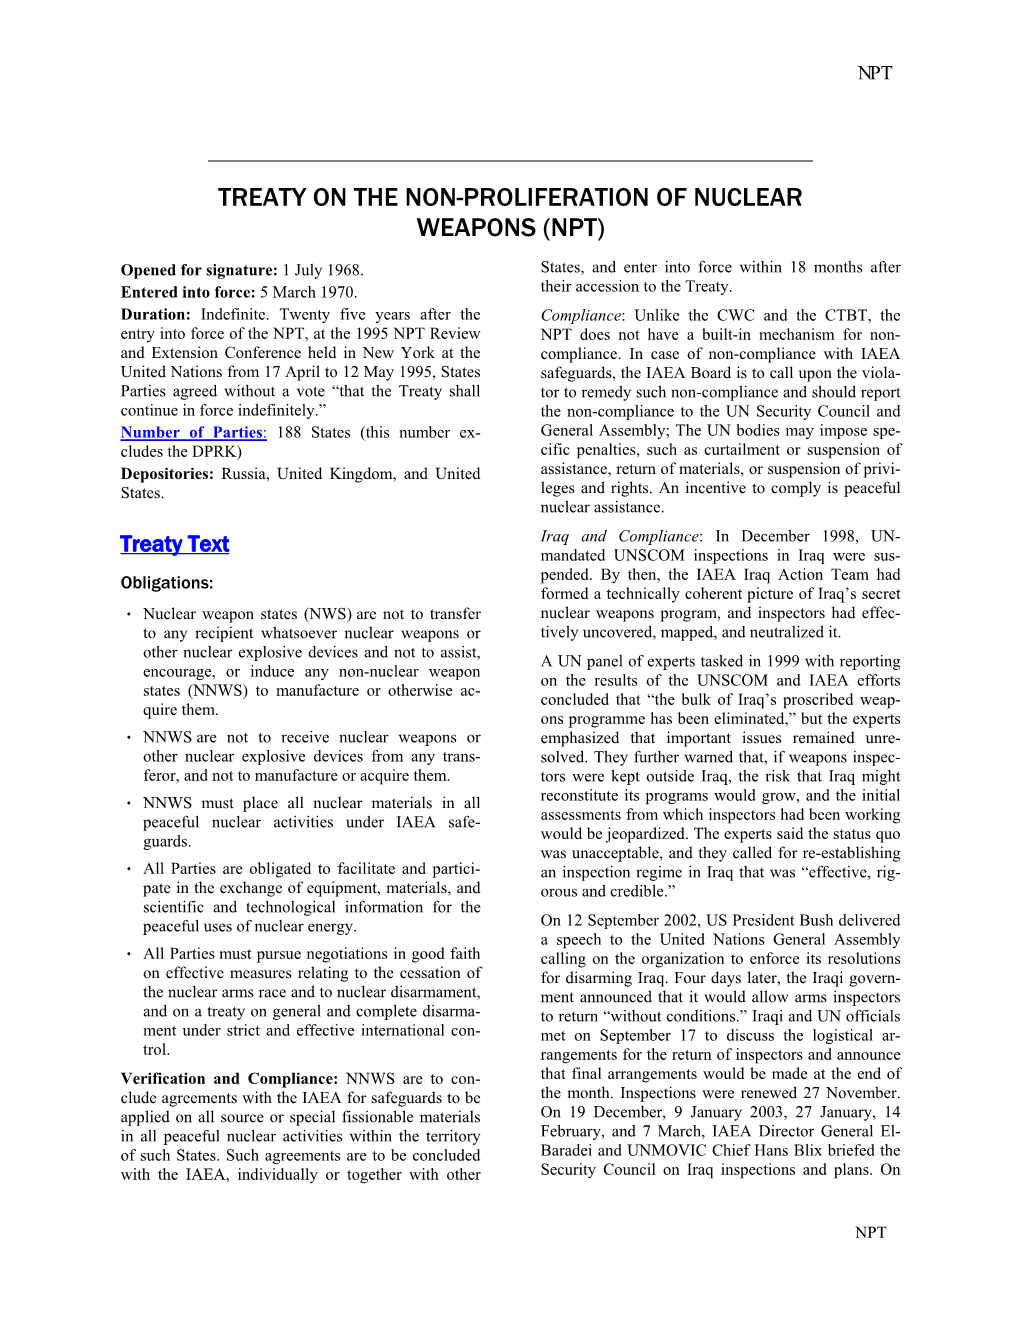 UN Treaty on the Non-Proliferation of Nuclear Weapons